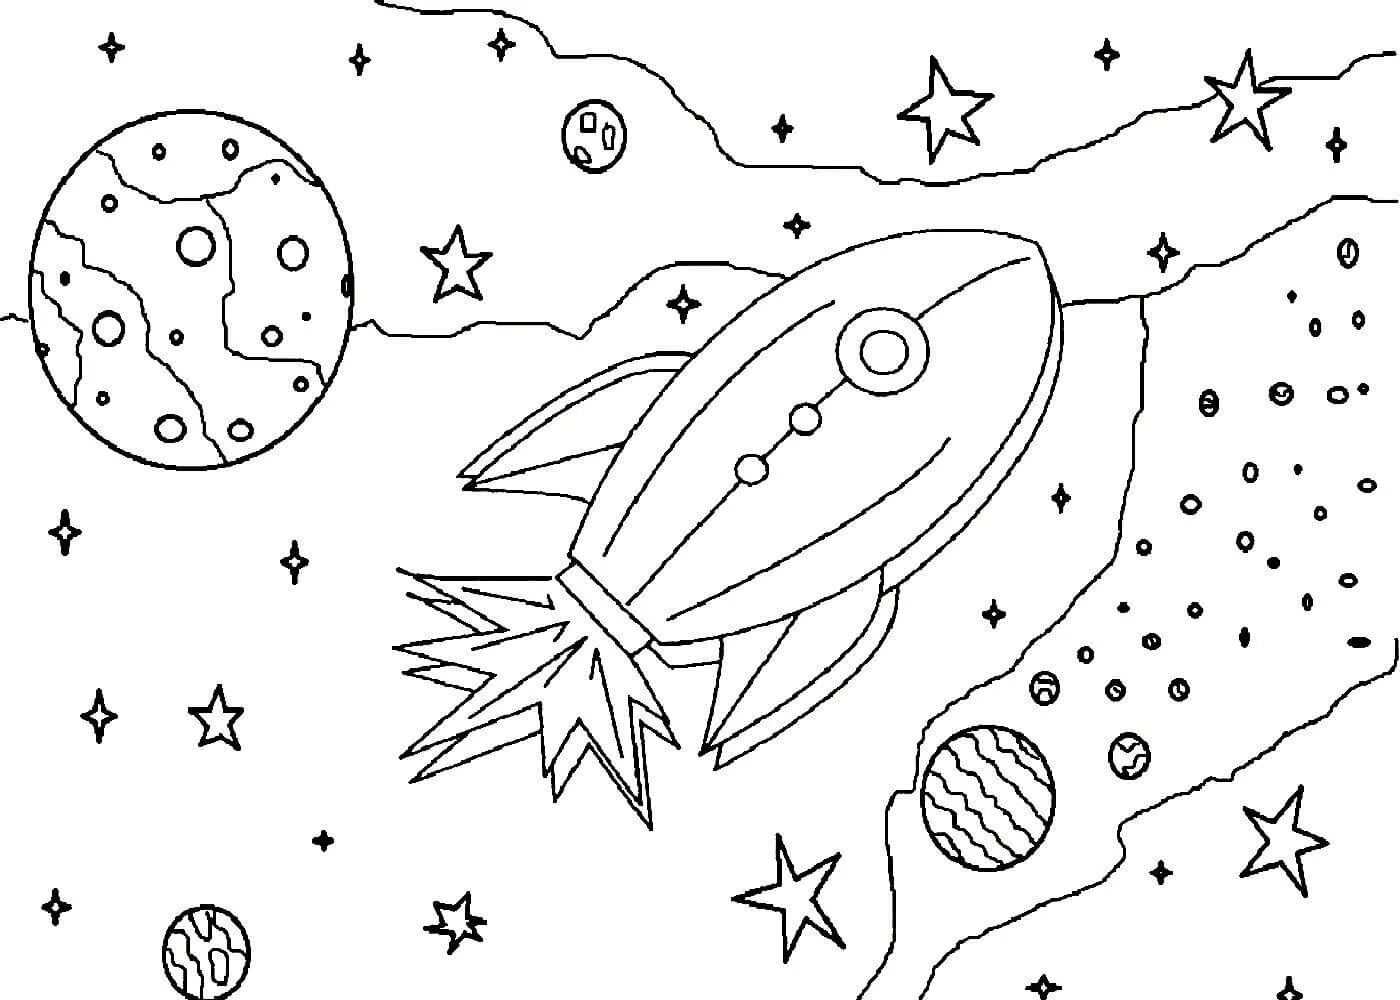 Incredible spaceship coloring book for 4-5 year olds